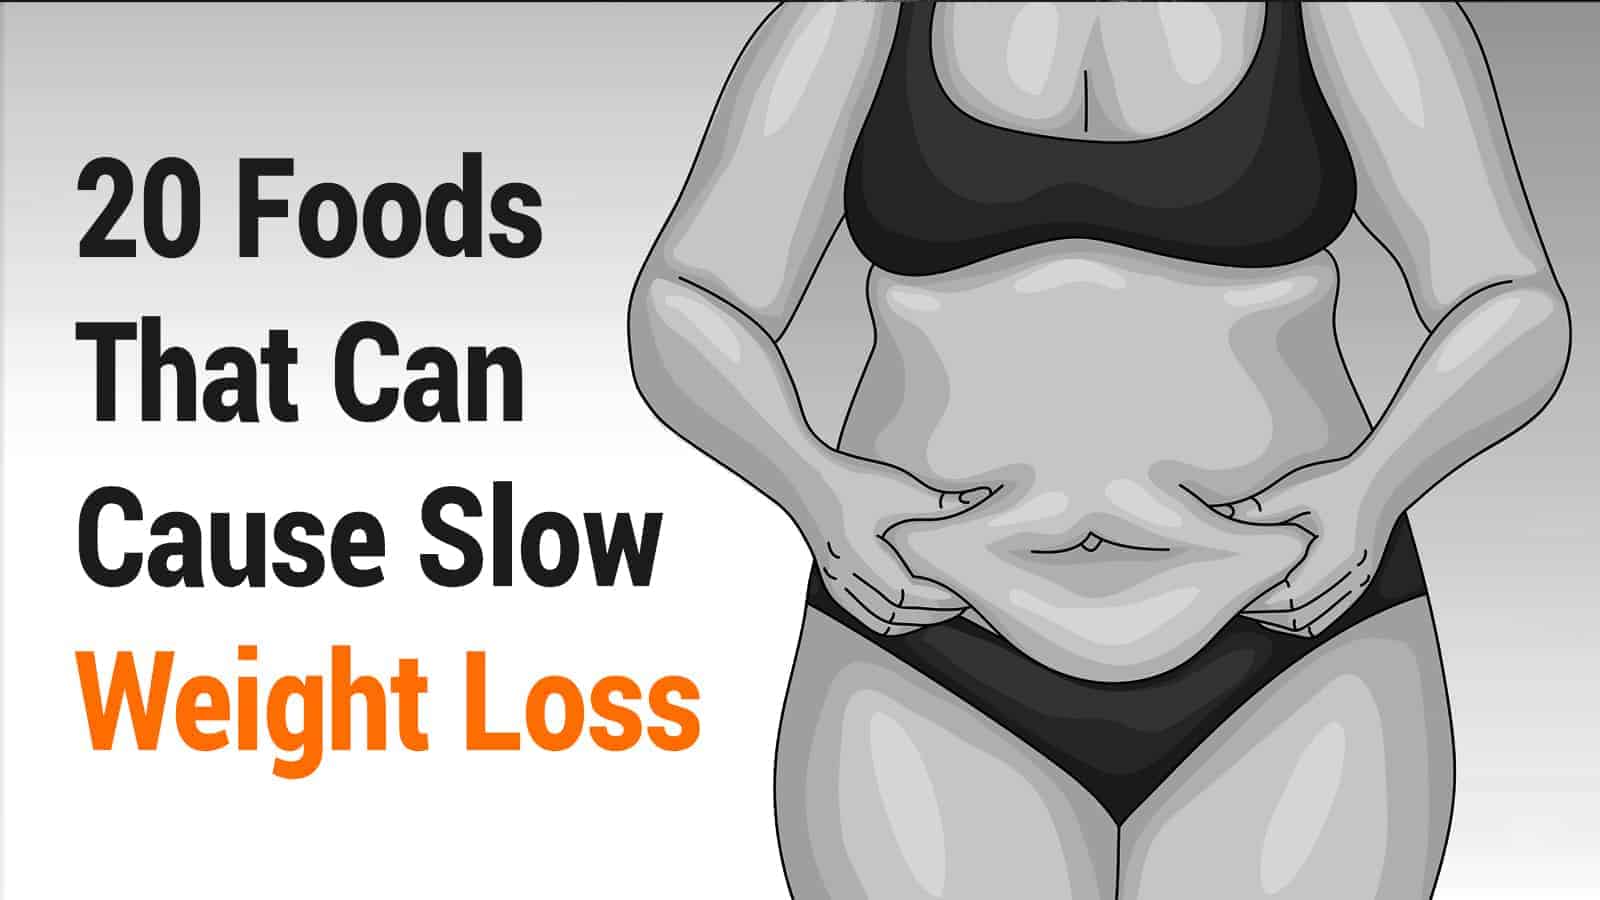 20 Foods That Can Cause Slow Weight Loss